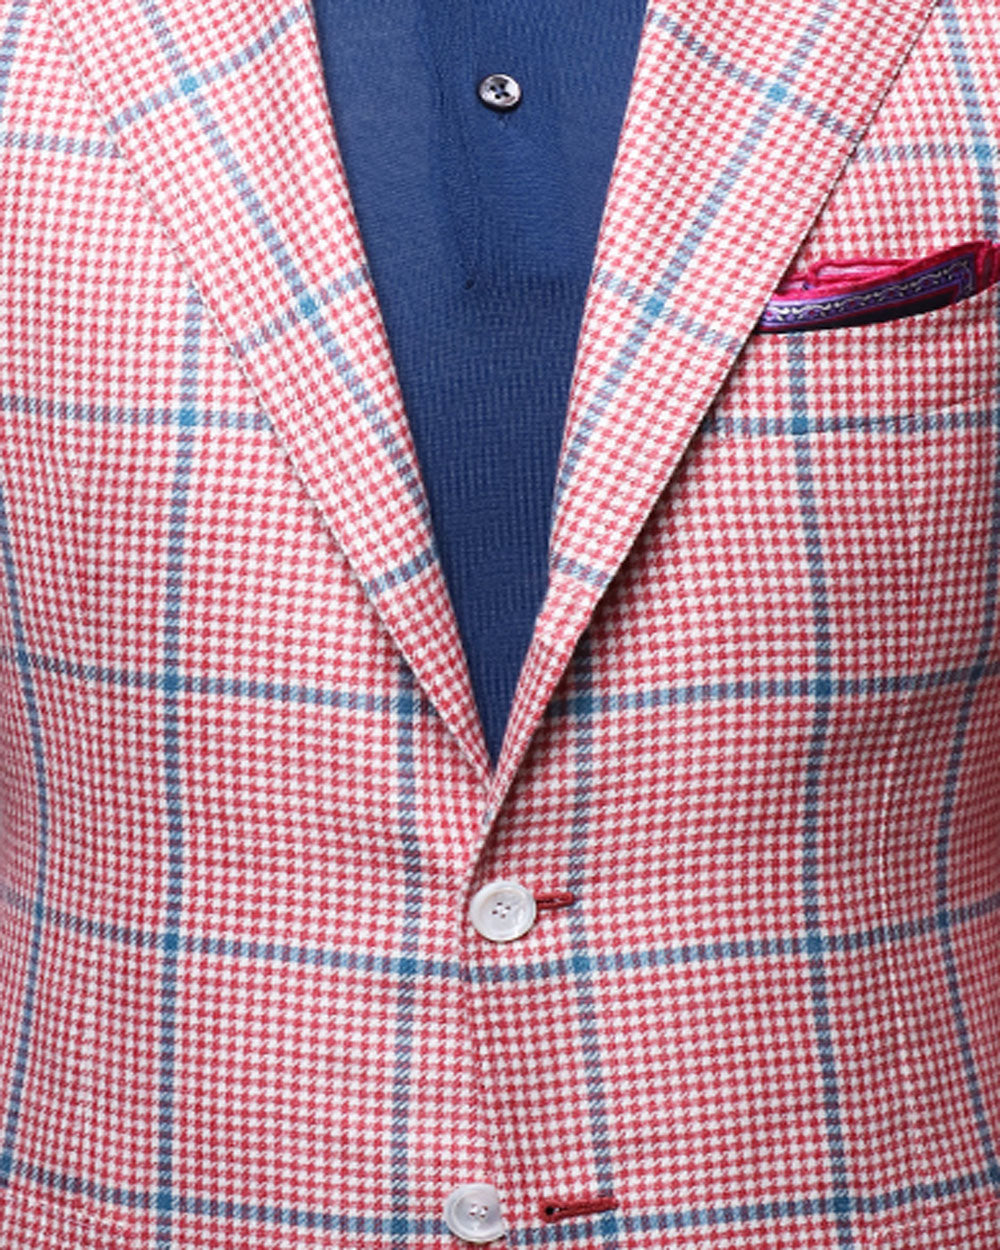 White and Red Windowpane Houndstooth Sportcoat